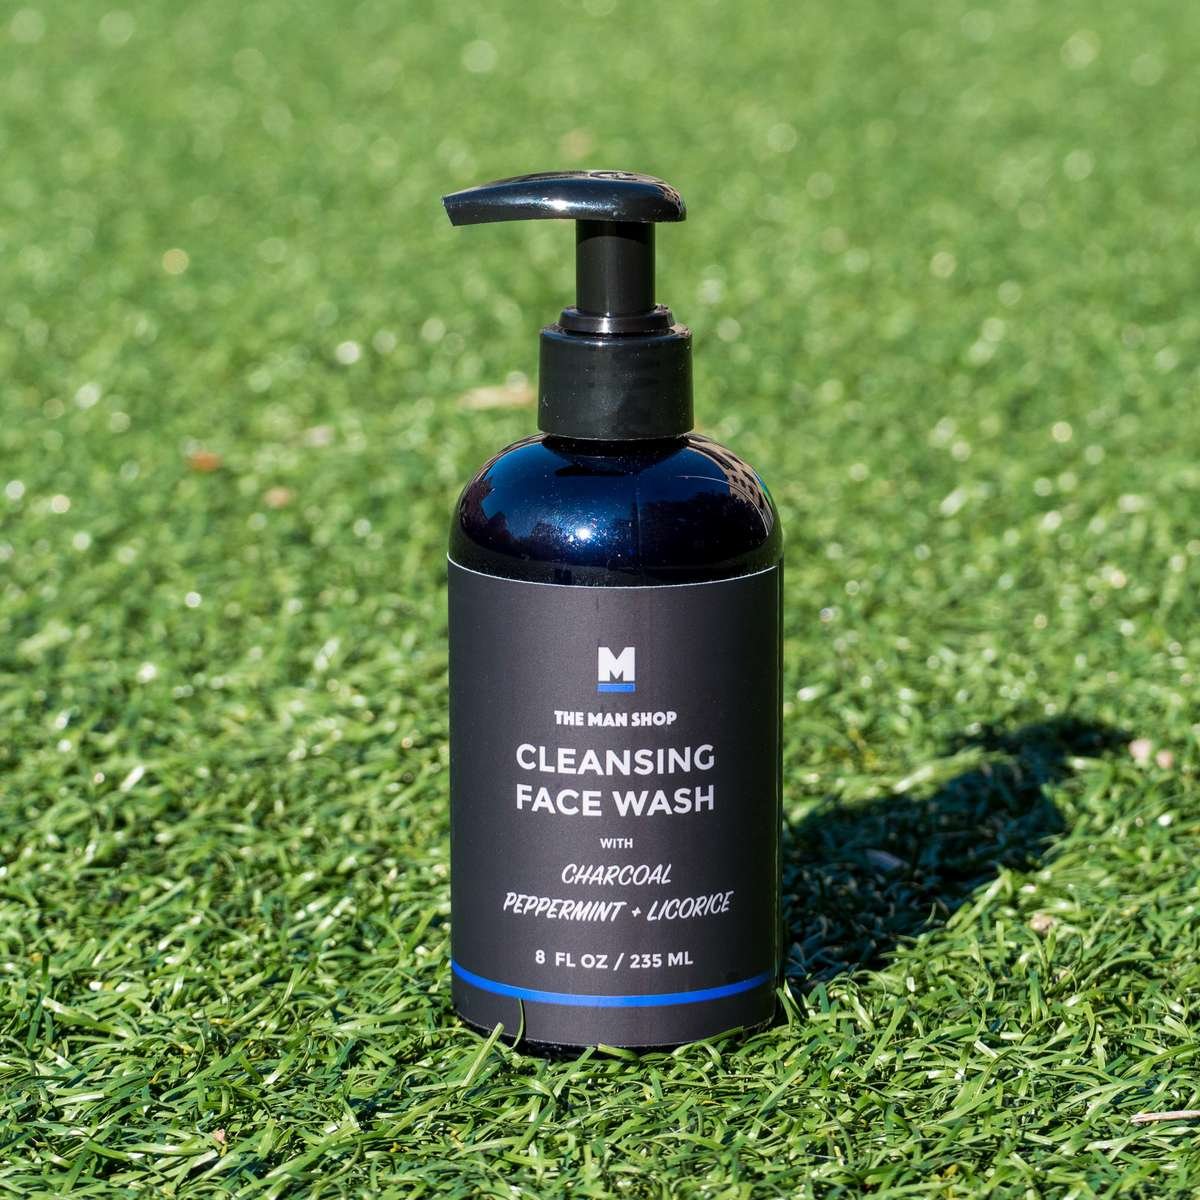 THE MAN SHOP ACTIVATED CHARCOAL FACE WASH